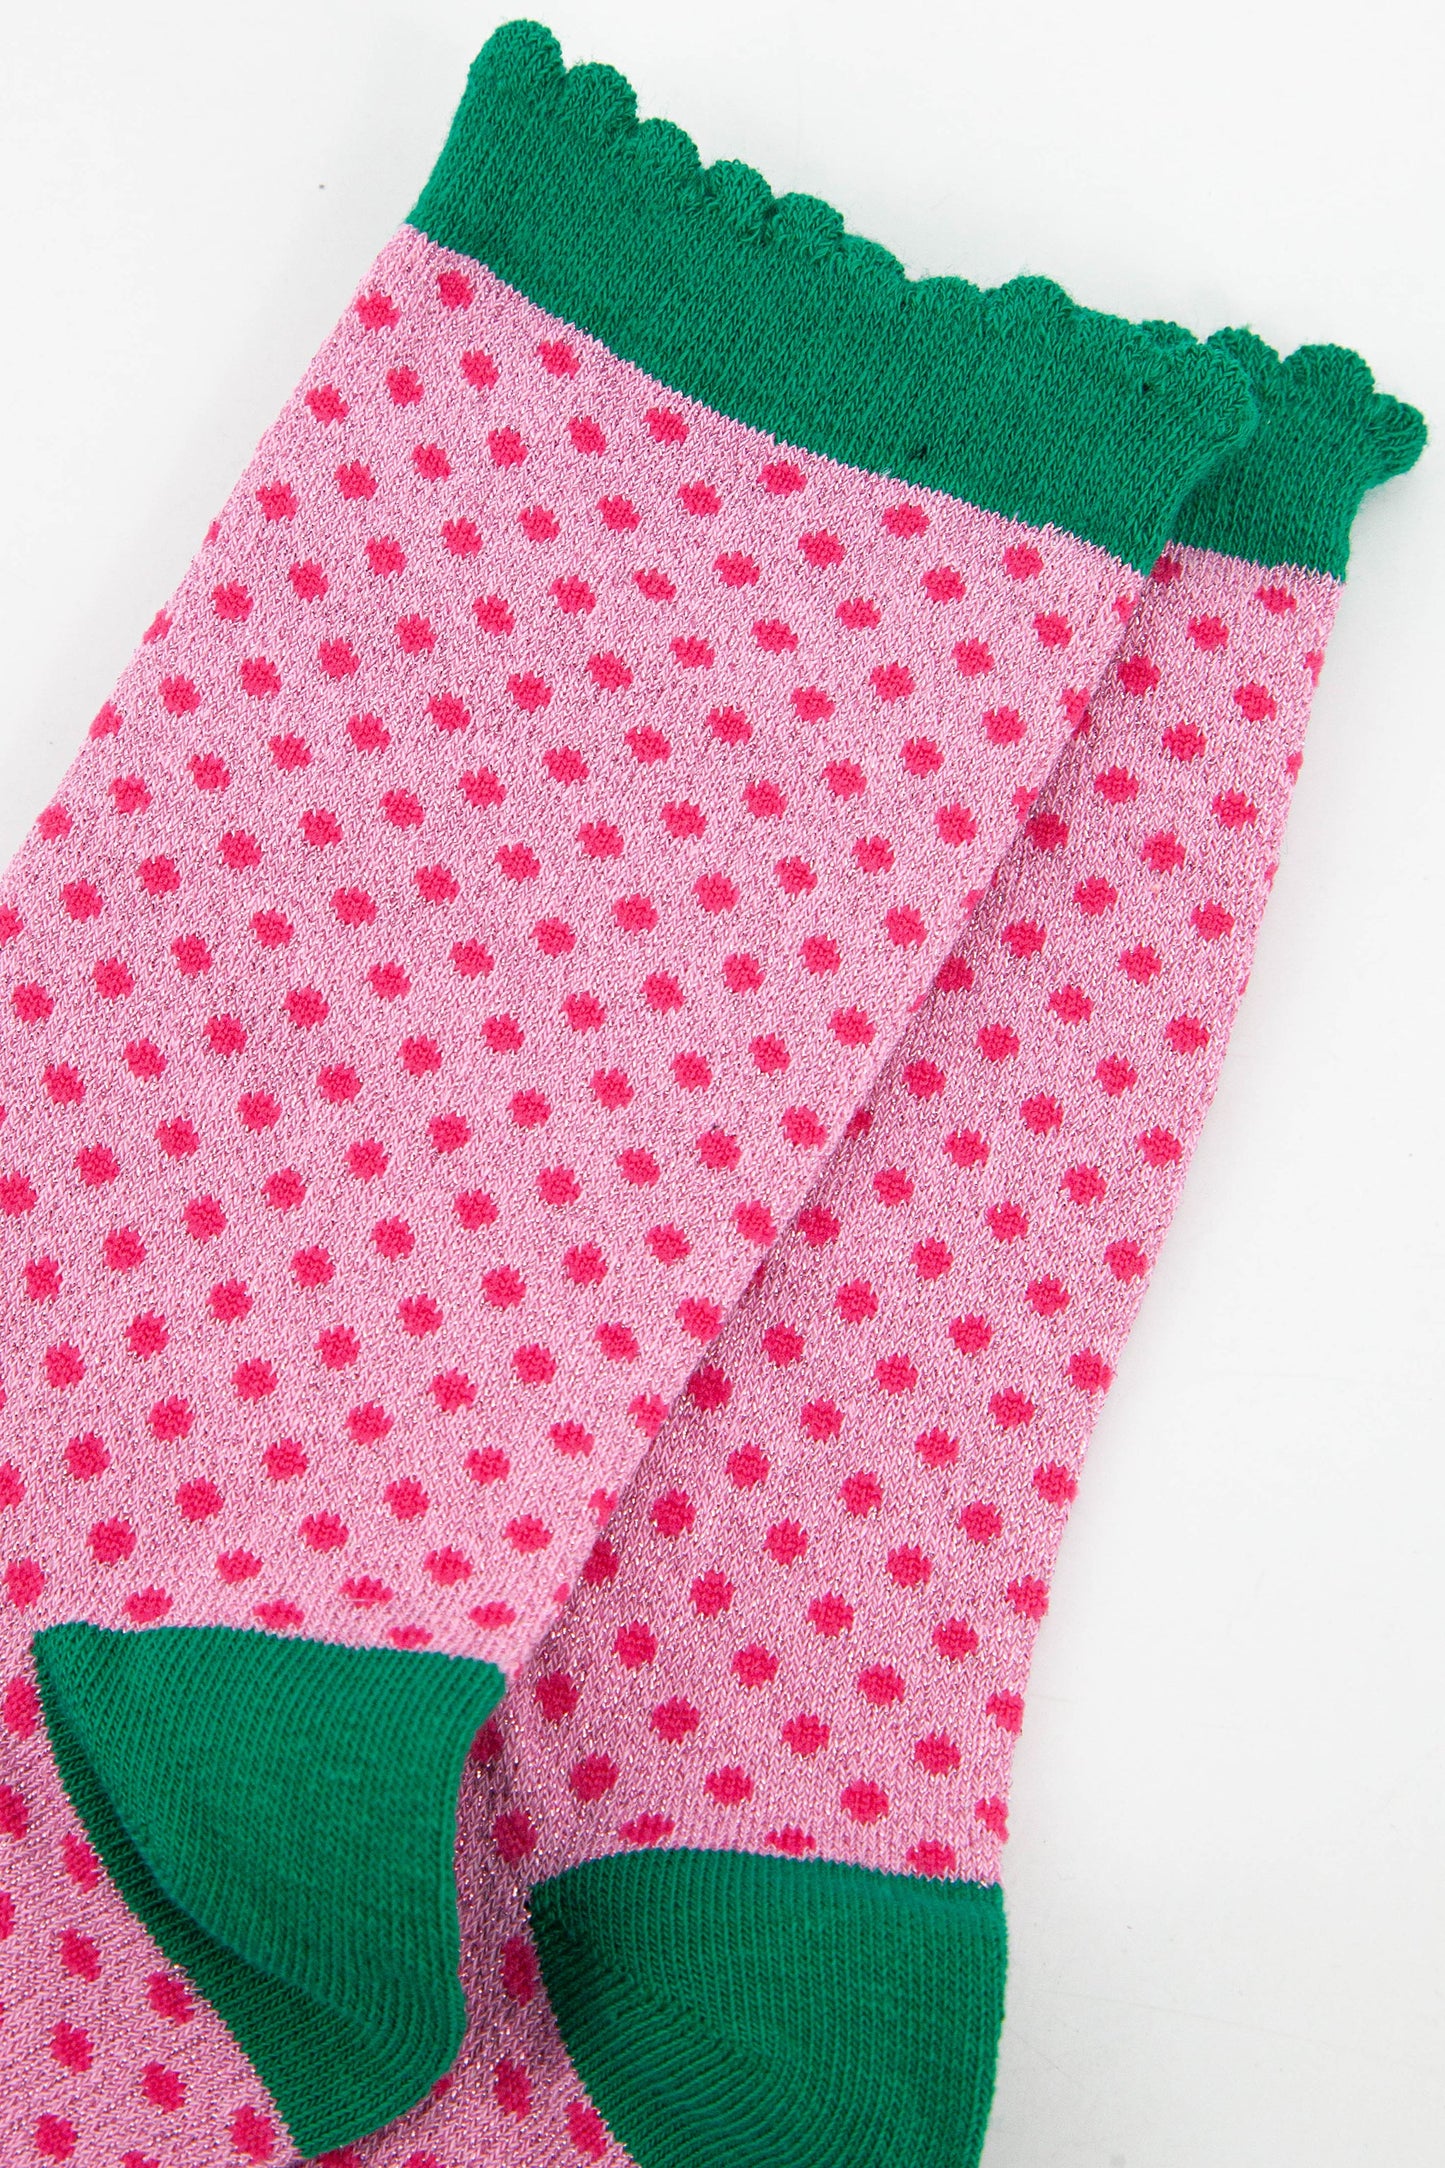 close up of the pink sparkly polka dot material